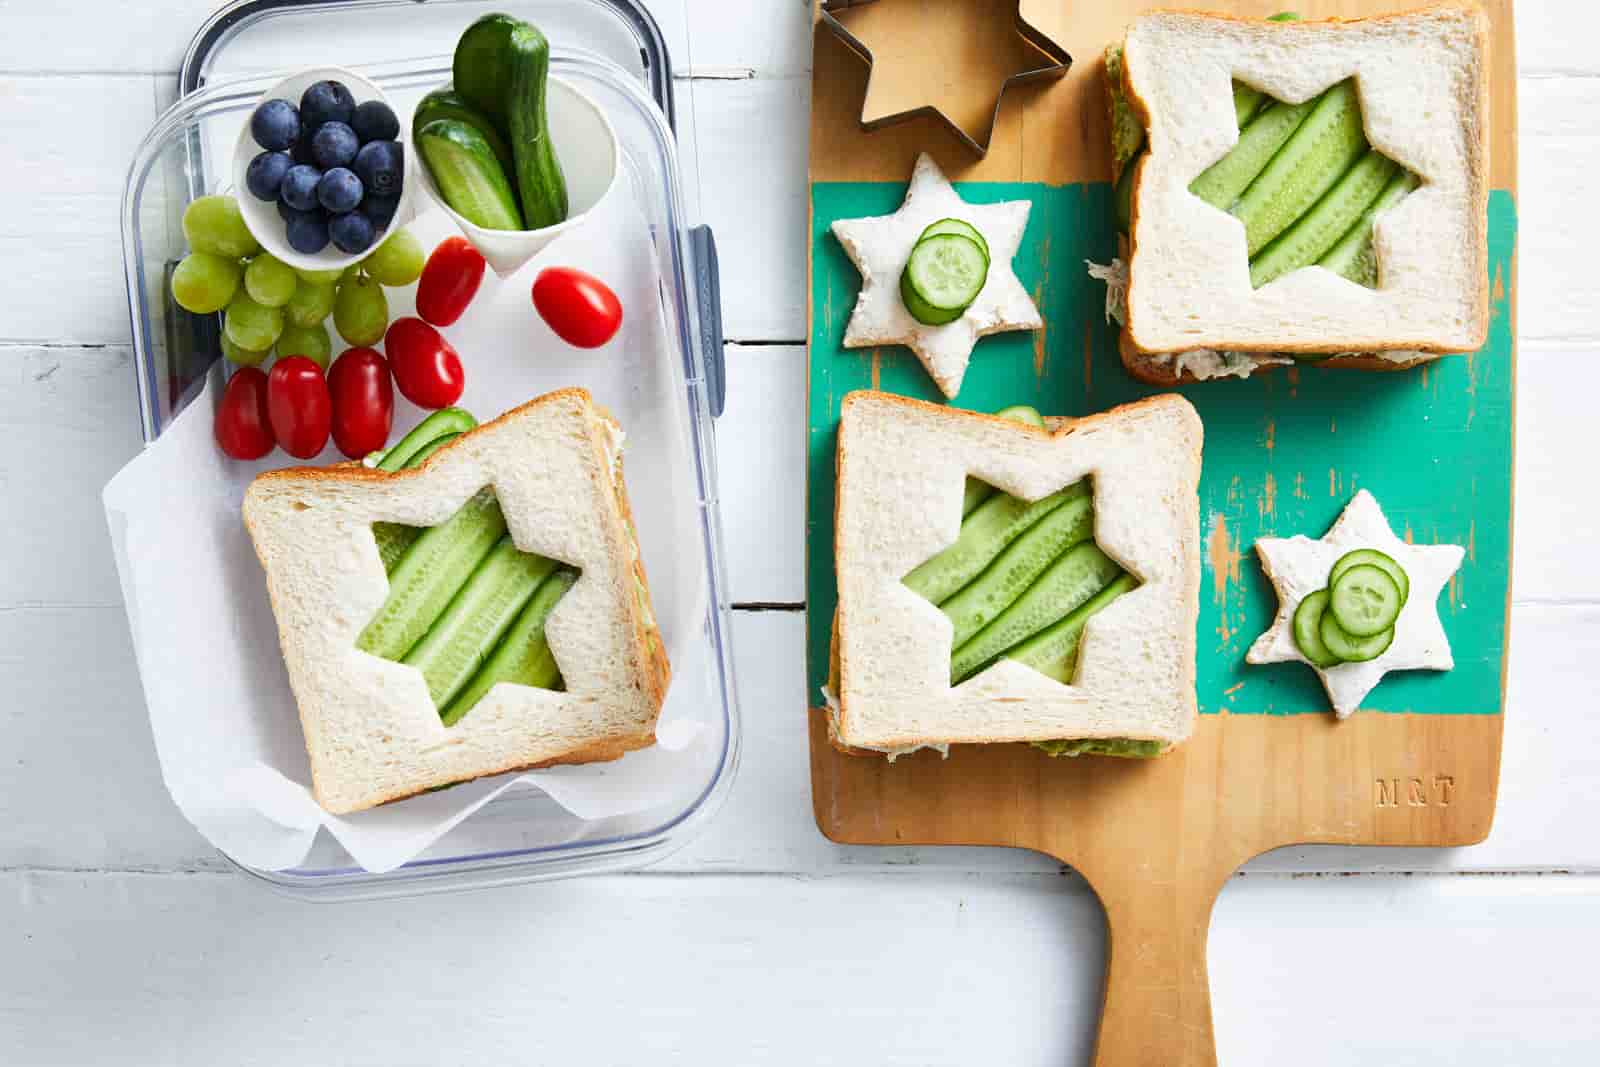 Star shaped sandwiches along with fruits and vegetables in a lunchbox. Next to it is a board with another sandwich and a star shaped cutter.